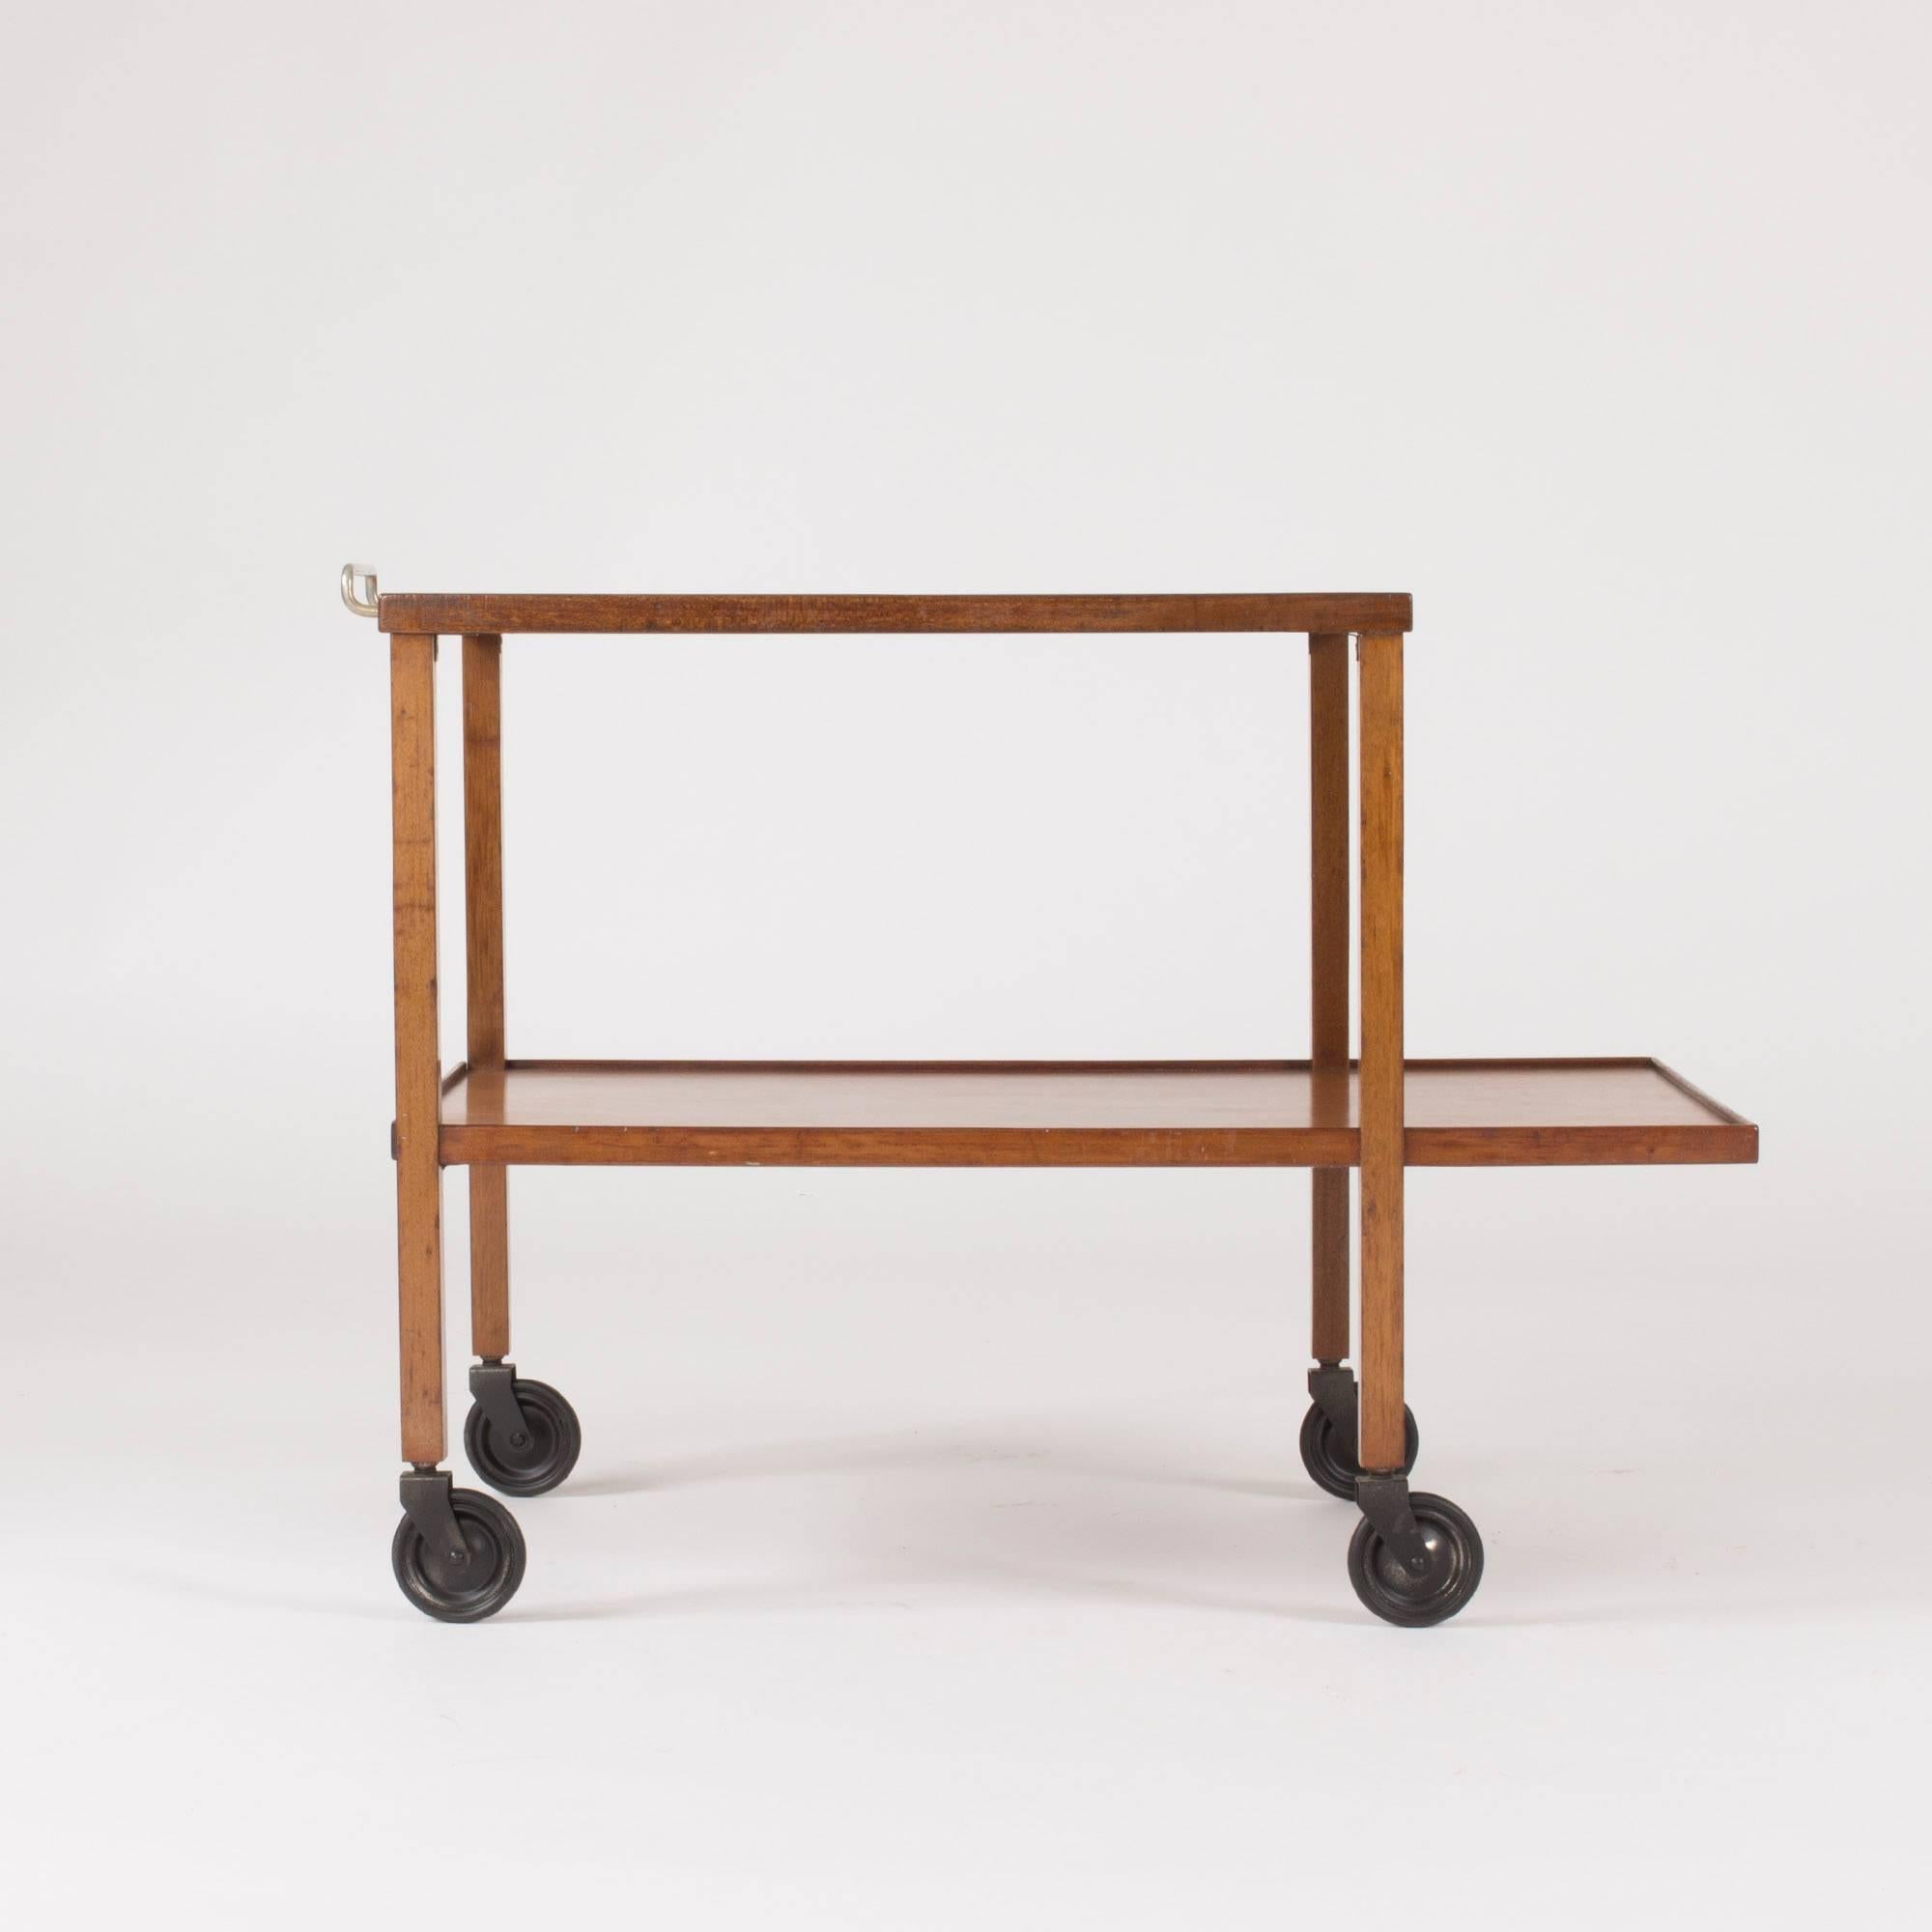 Mahogany bar trolley by Josef Frank. Simplistic to the core with a tempered Silhouette and great proportions. Steel handle.